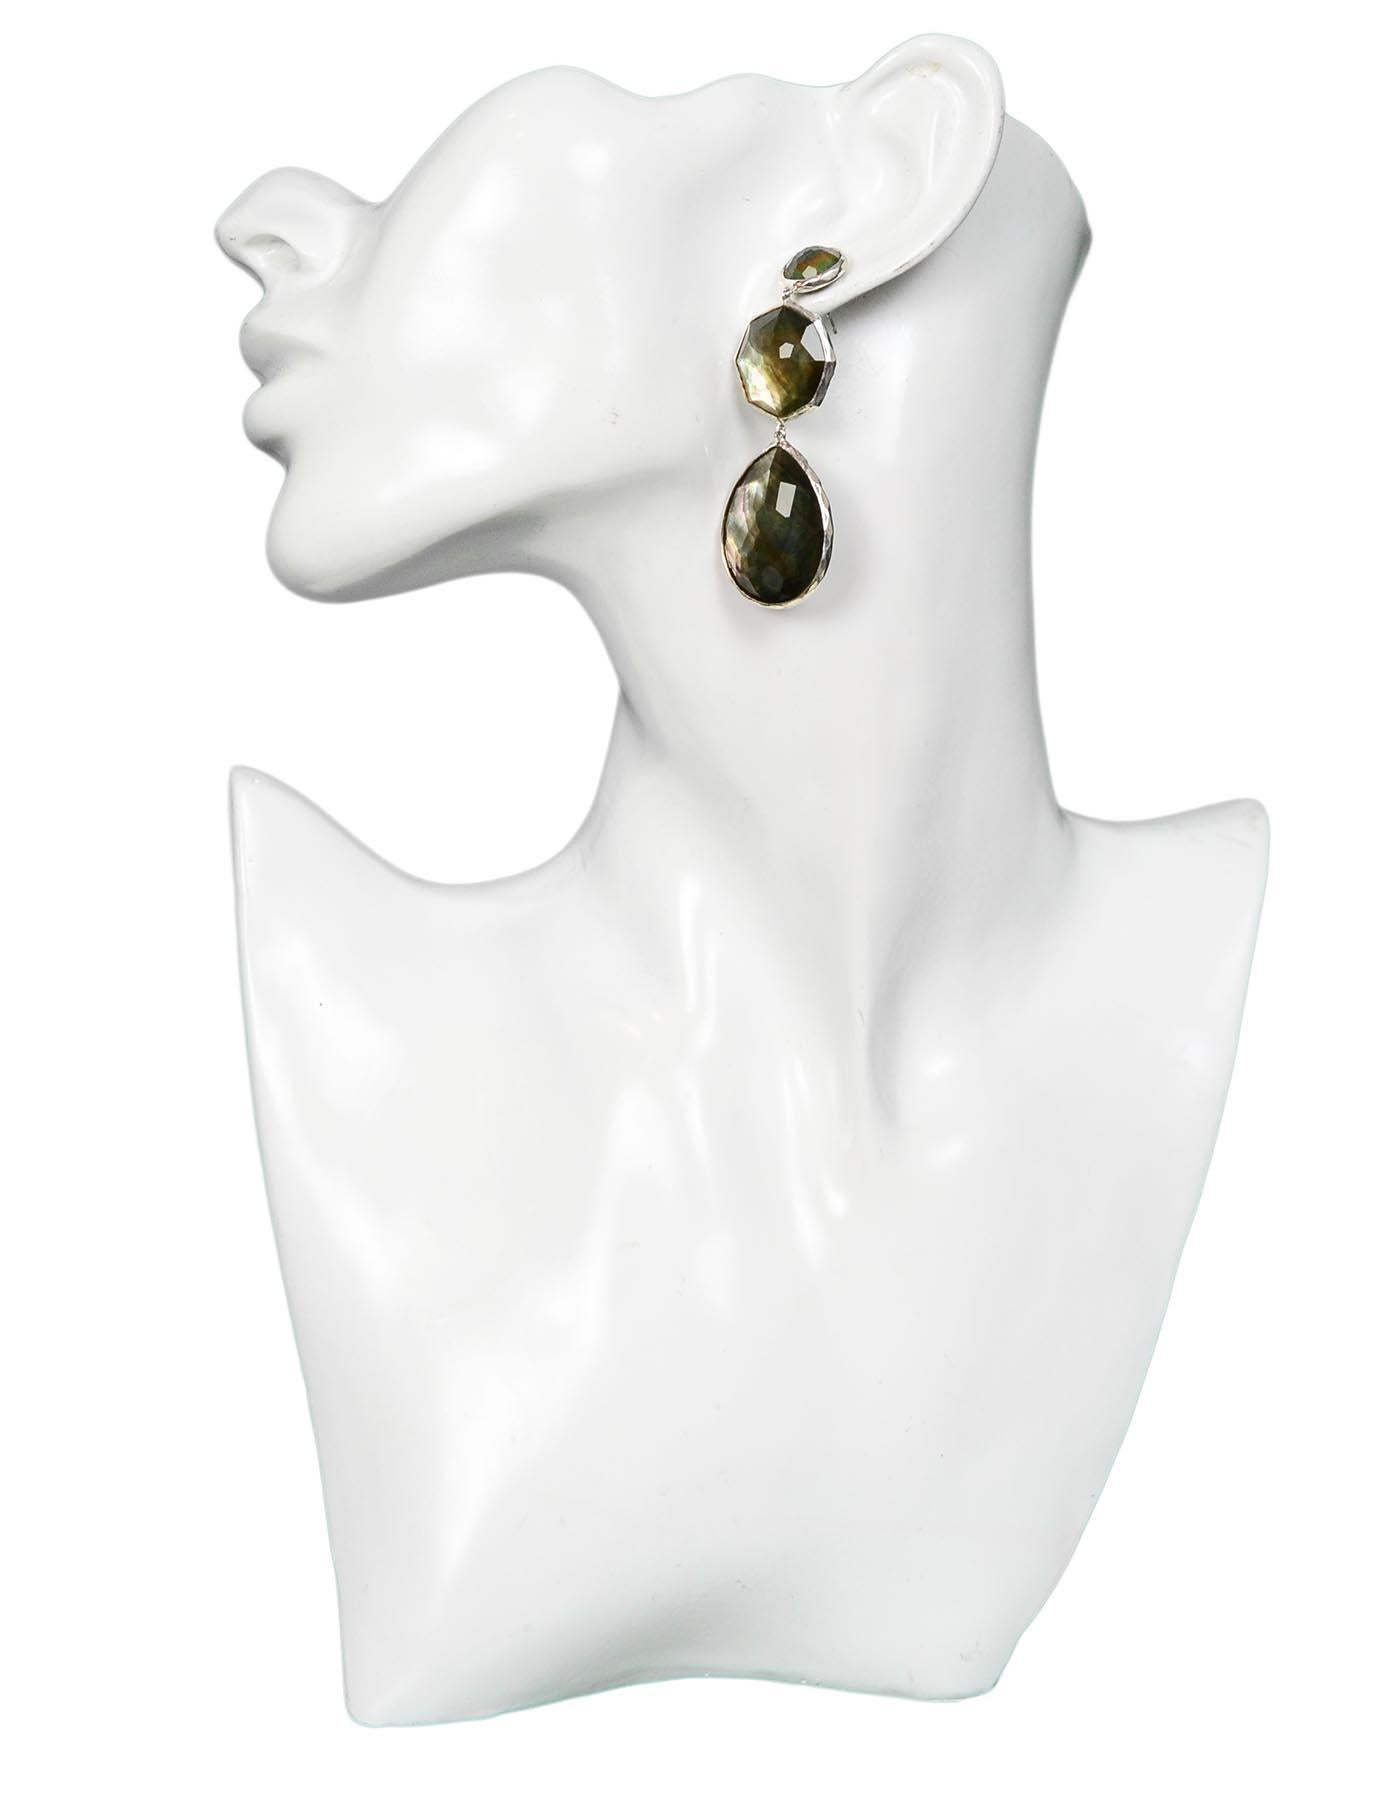 Ippolita Sterling Silver/Mother Of Pearl/Quartz Doublet Crazy 8s Drop Earrings

Color: Silver, black, blue, green
Materials: Sterling silver, quartz, mother of pearl
Hallmarks: 